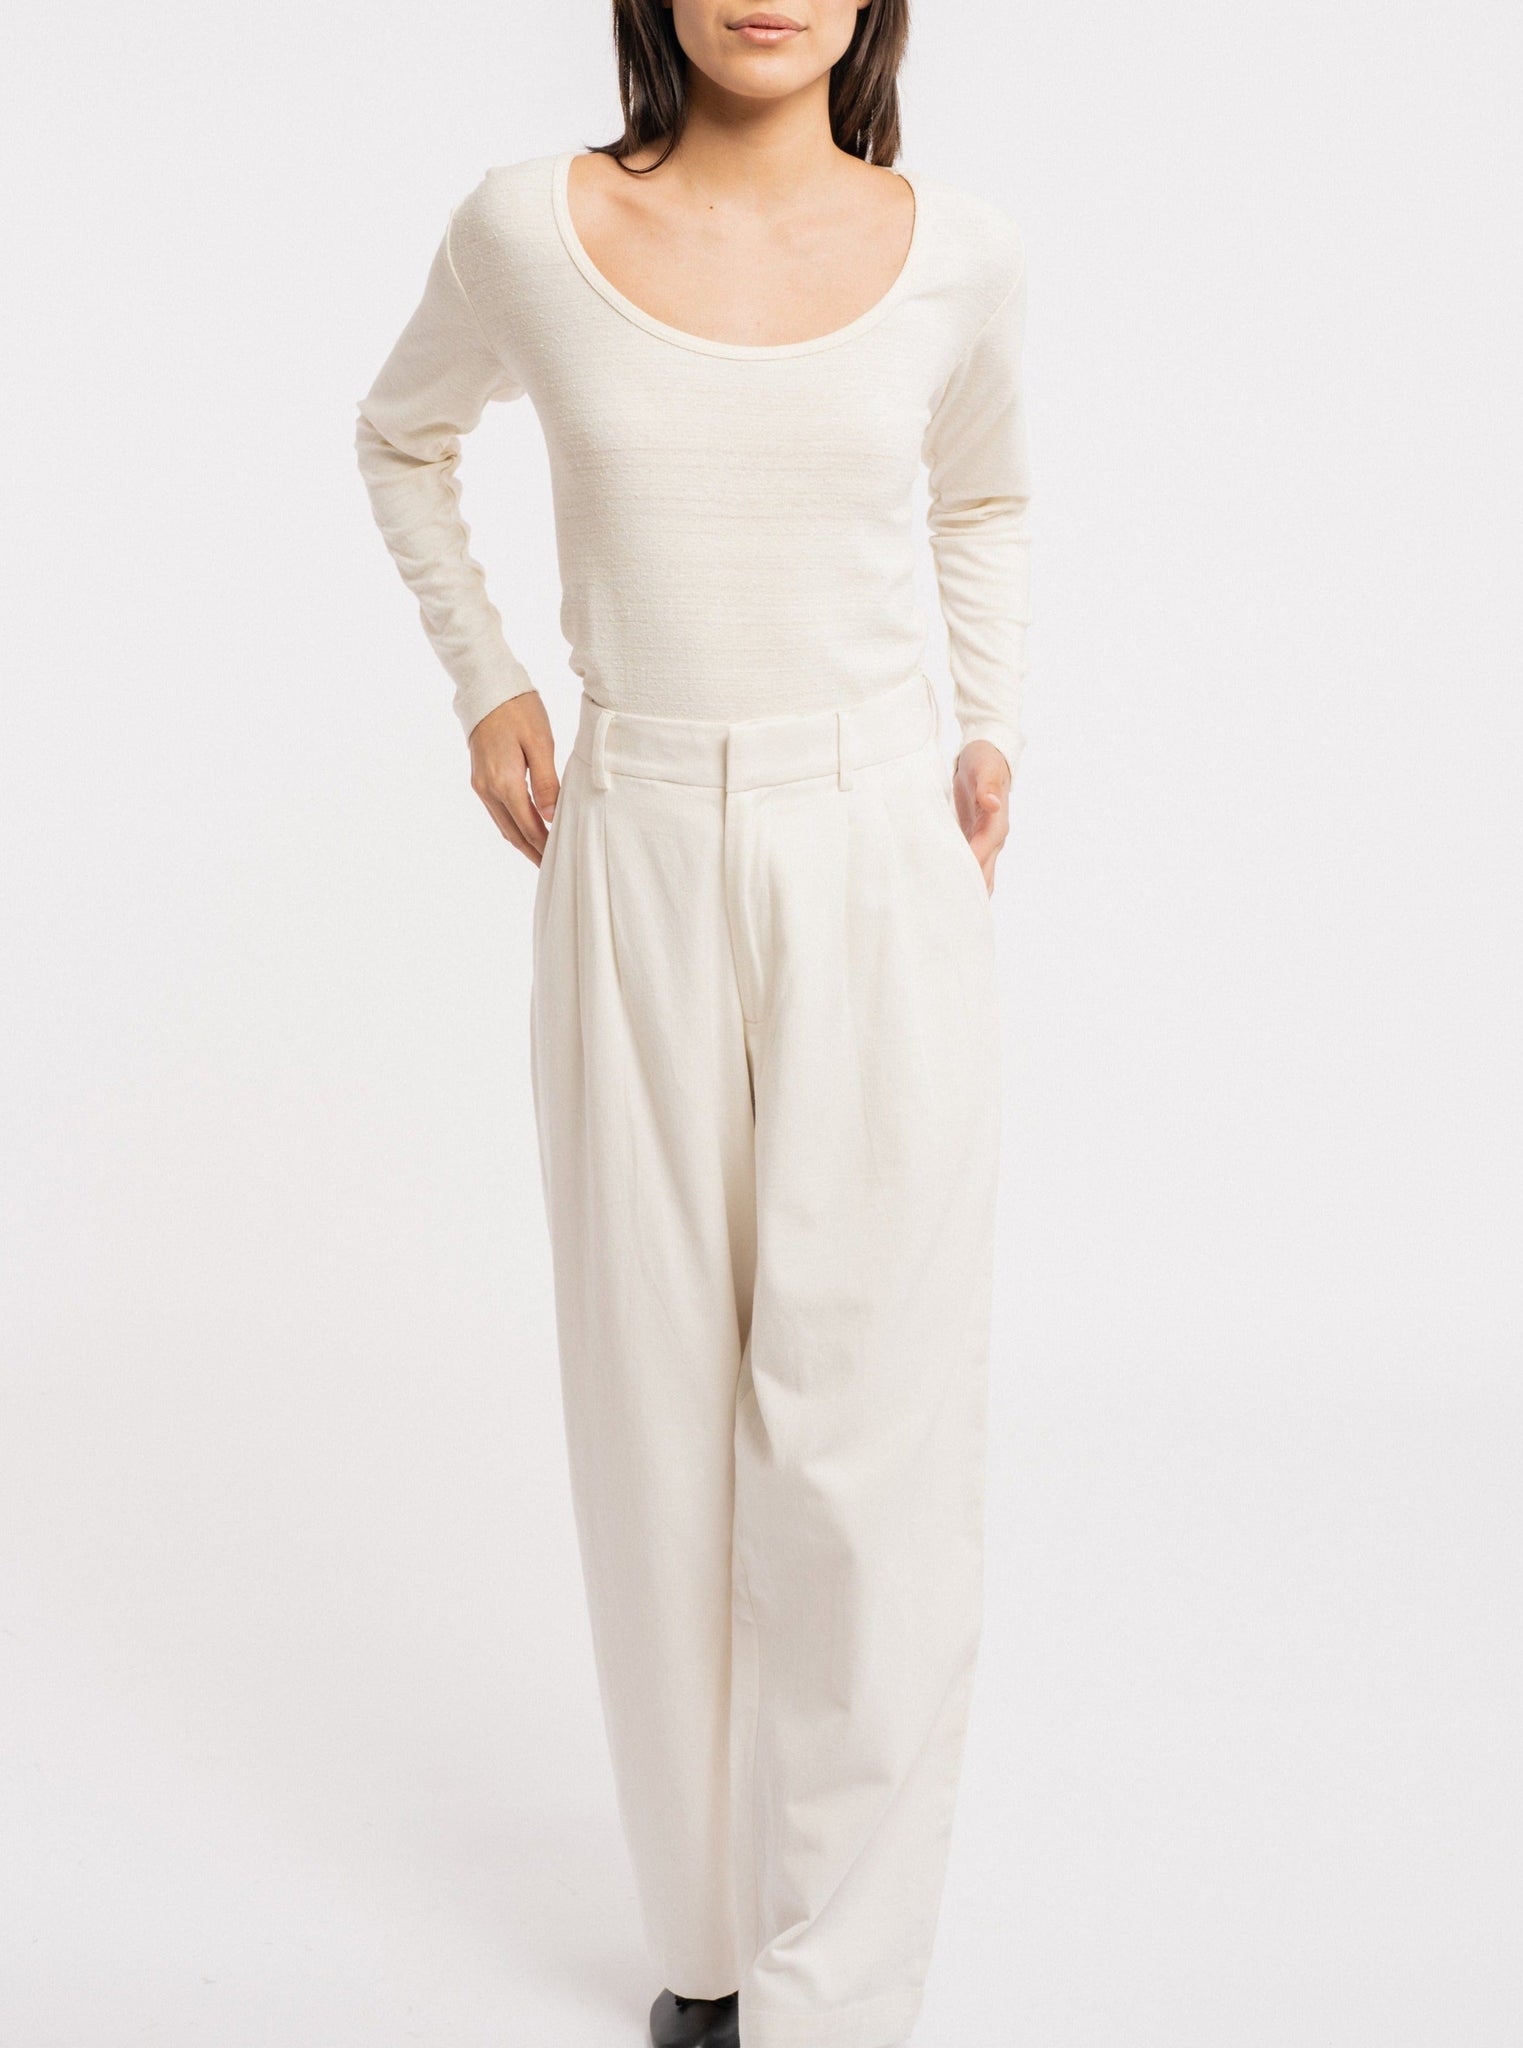 The model is wearing a Ballet Scoop Tee - Ivory - pre-order and wide leg pants.